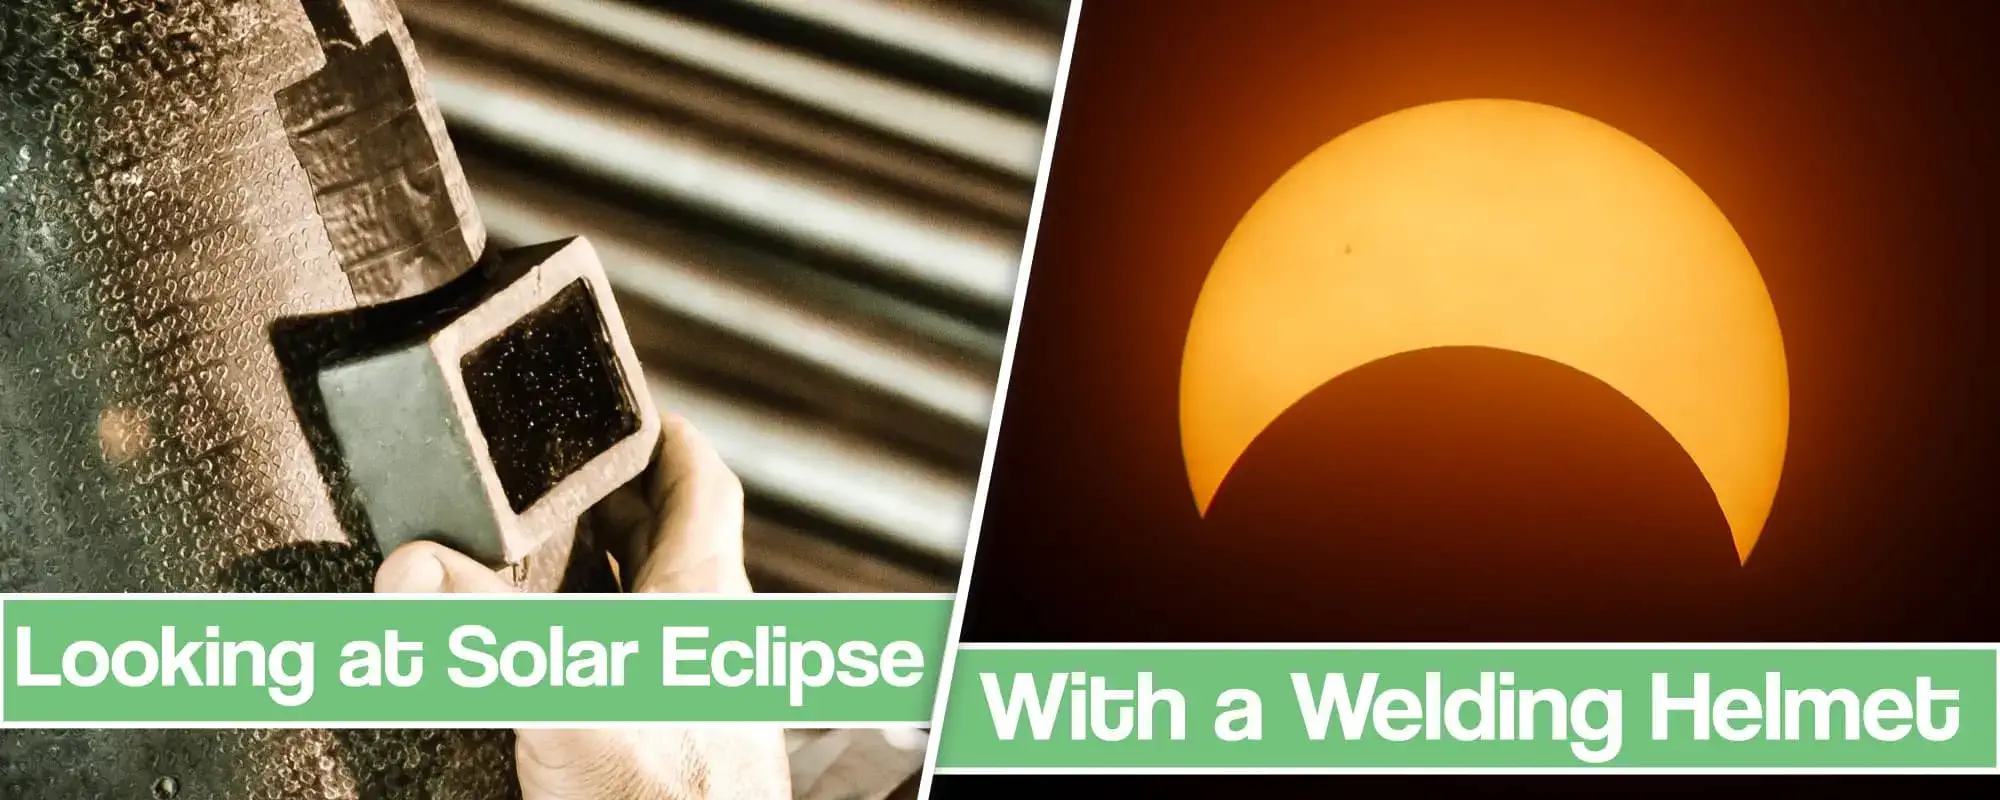 Feature image for viewing solar eclipse with a welding helmet article